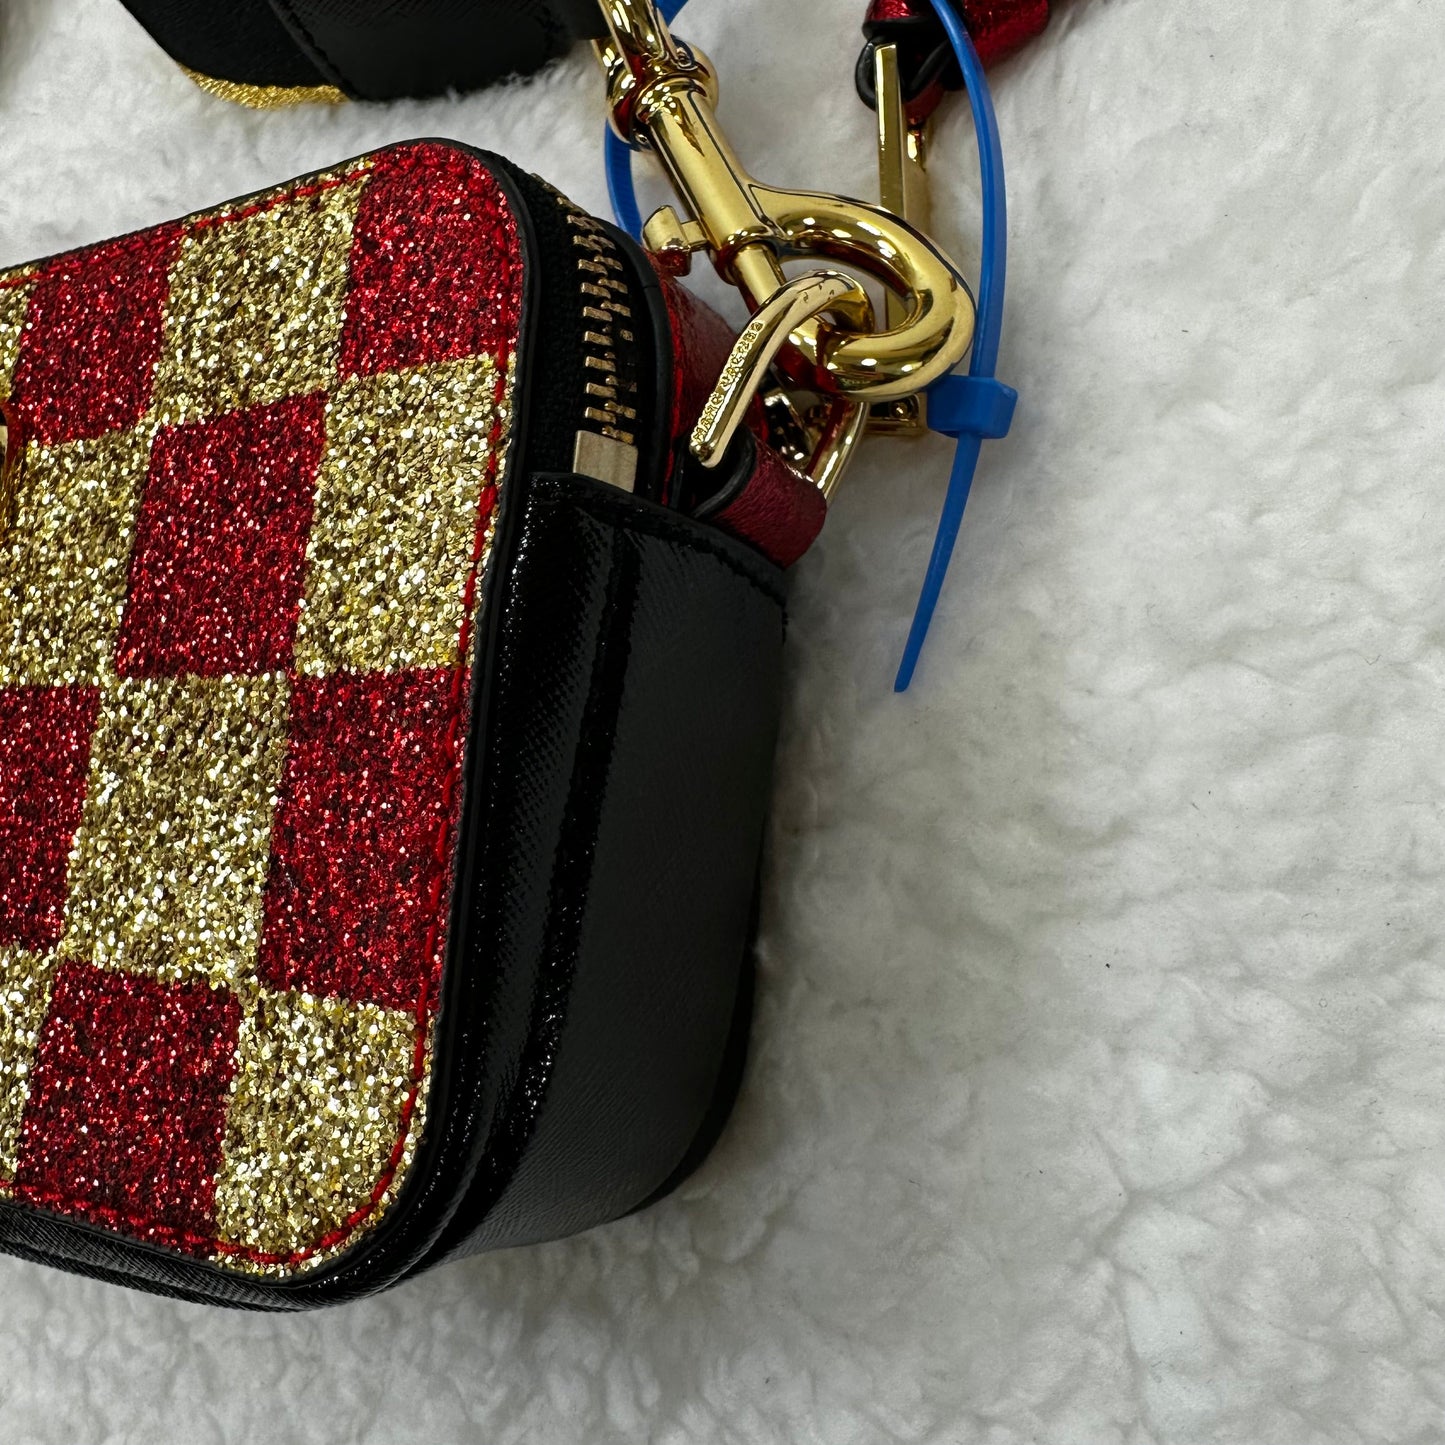 Checked Crossbody Designer Marc Jacobs, Size Small